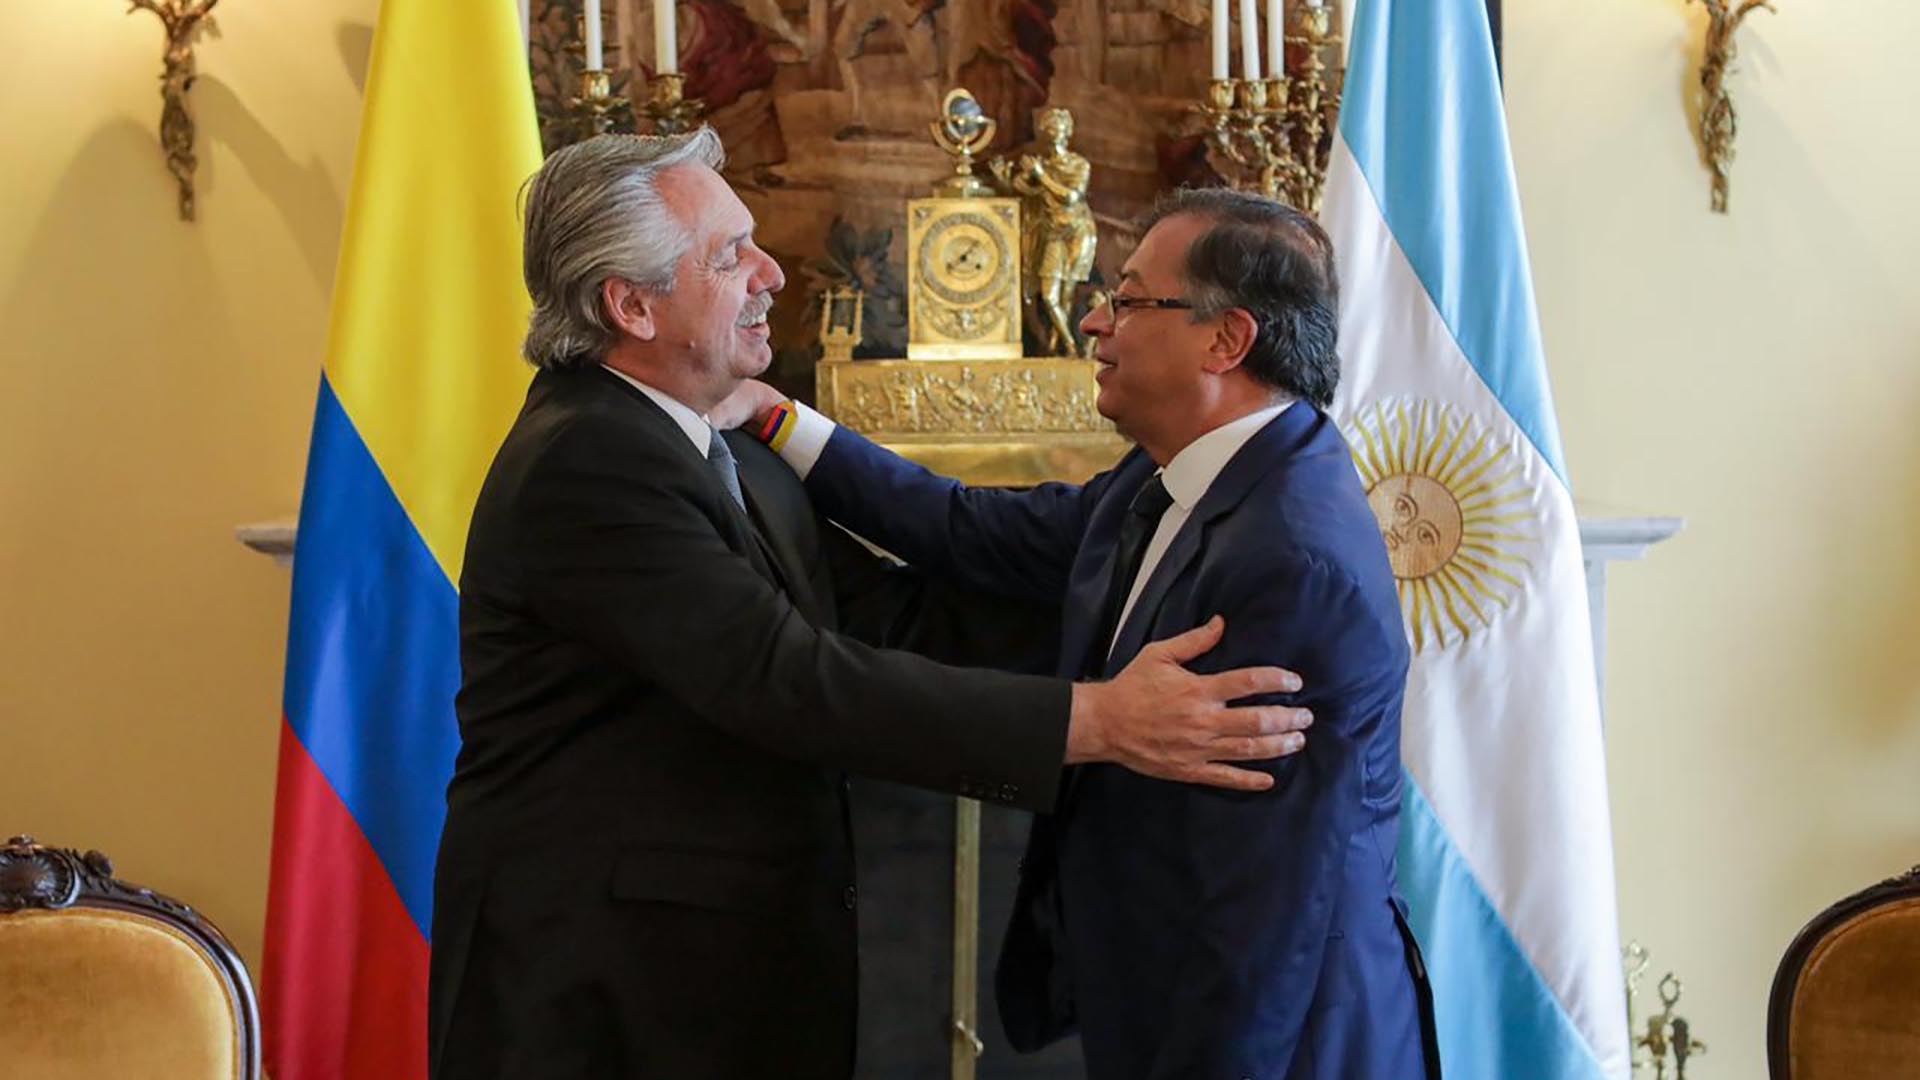 Alberto Fernández and Gustavo Petro during their official meeting in Bogotá